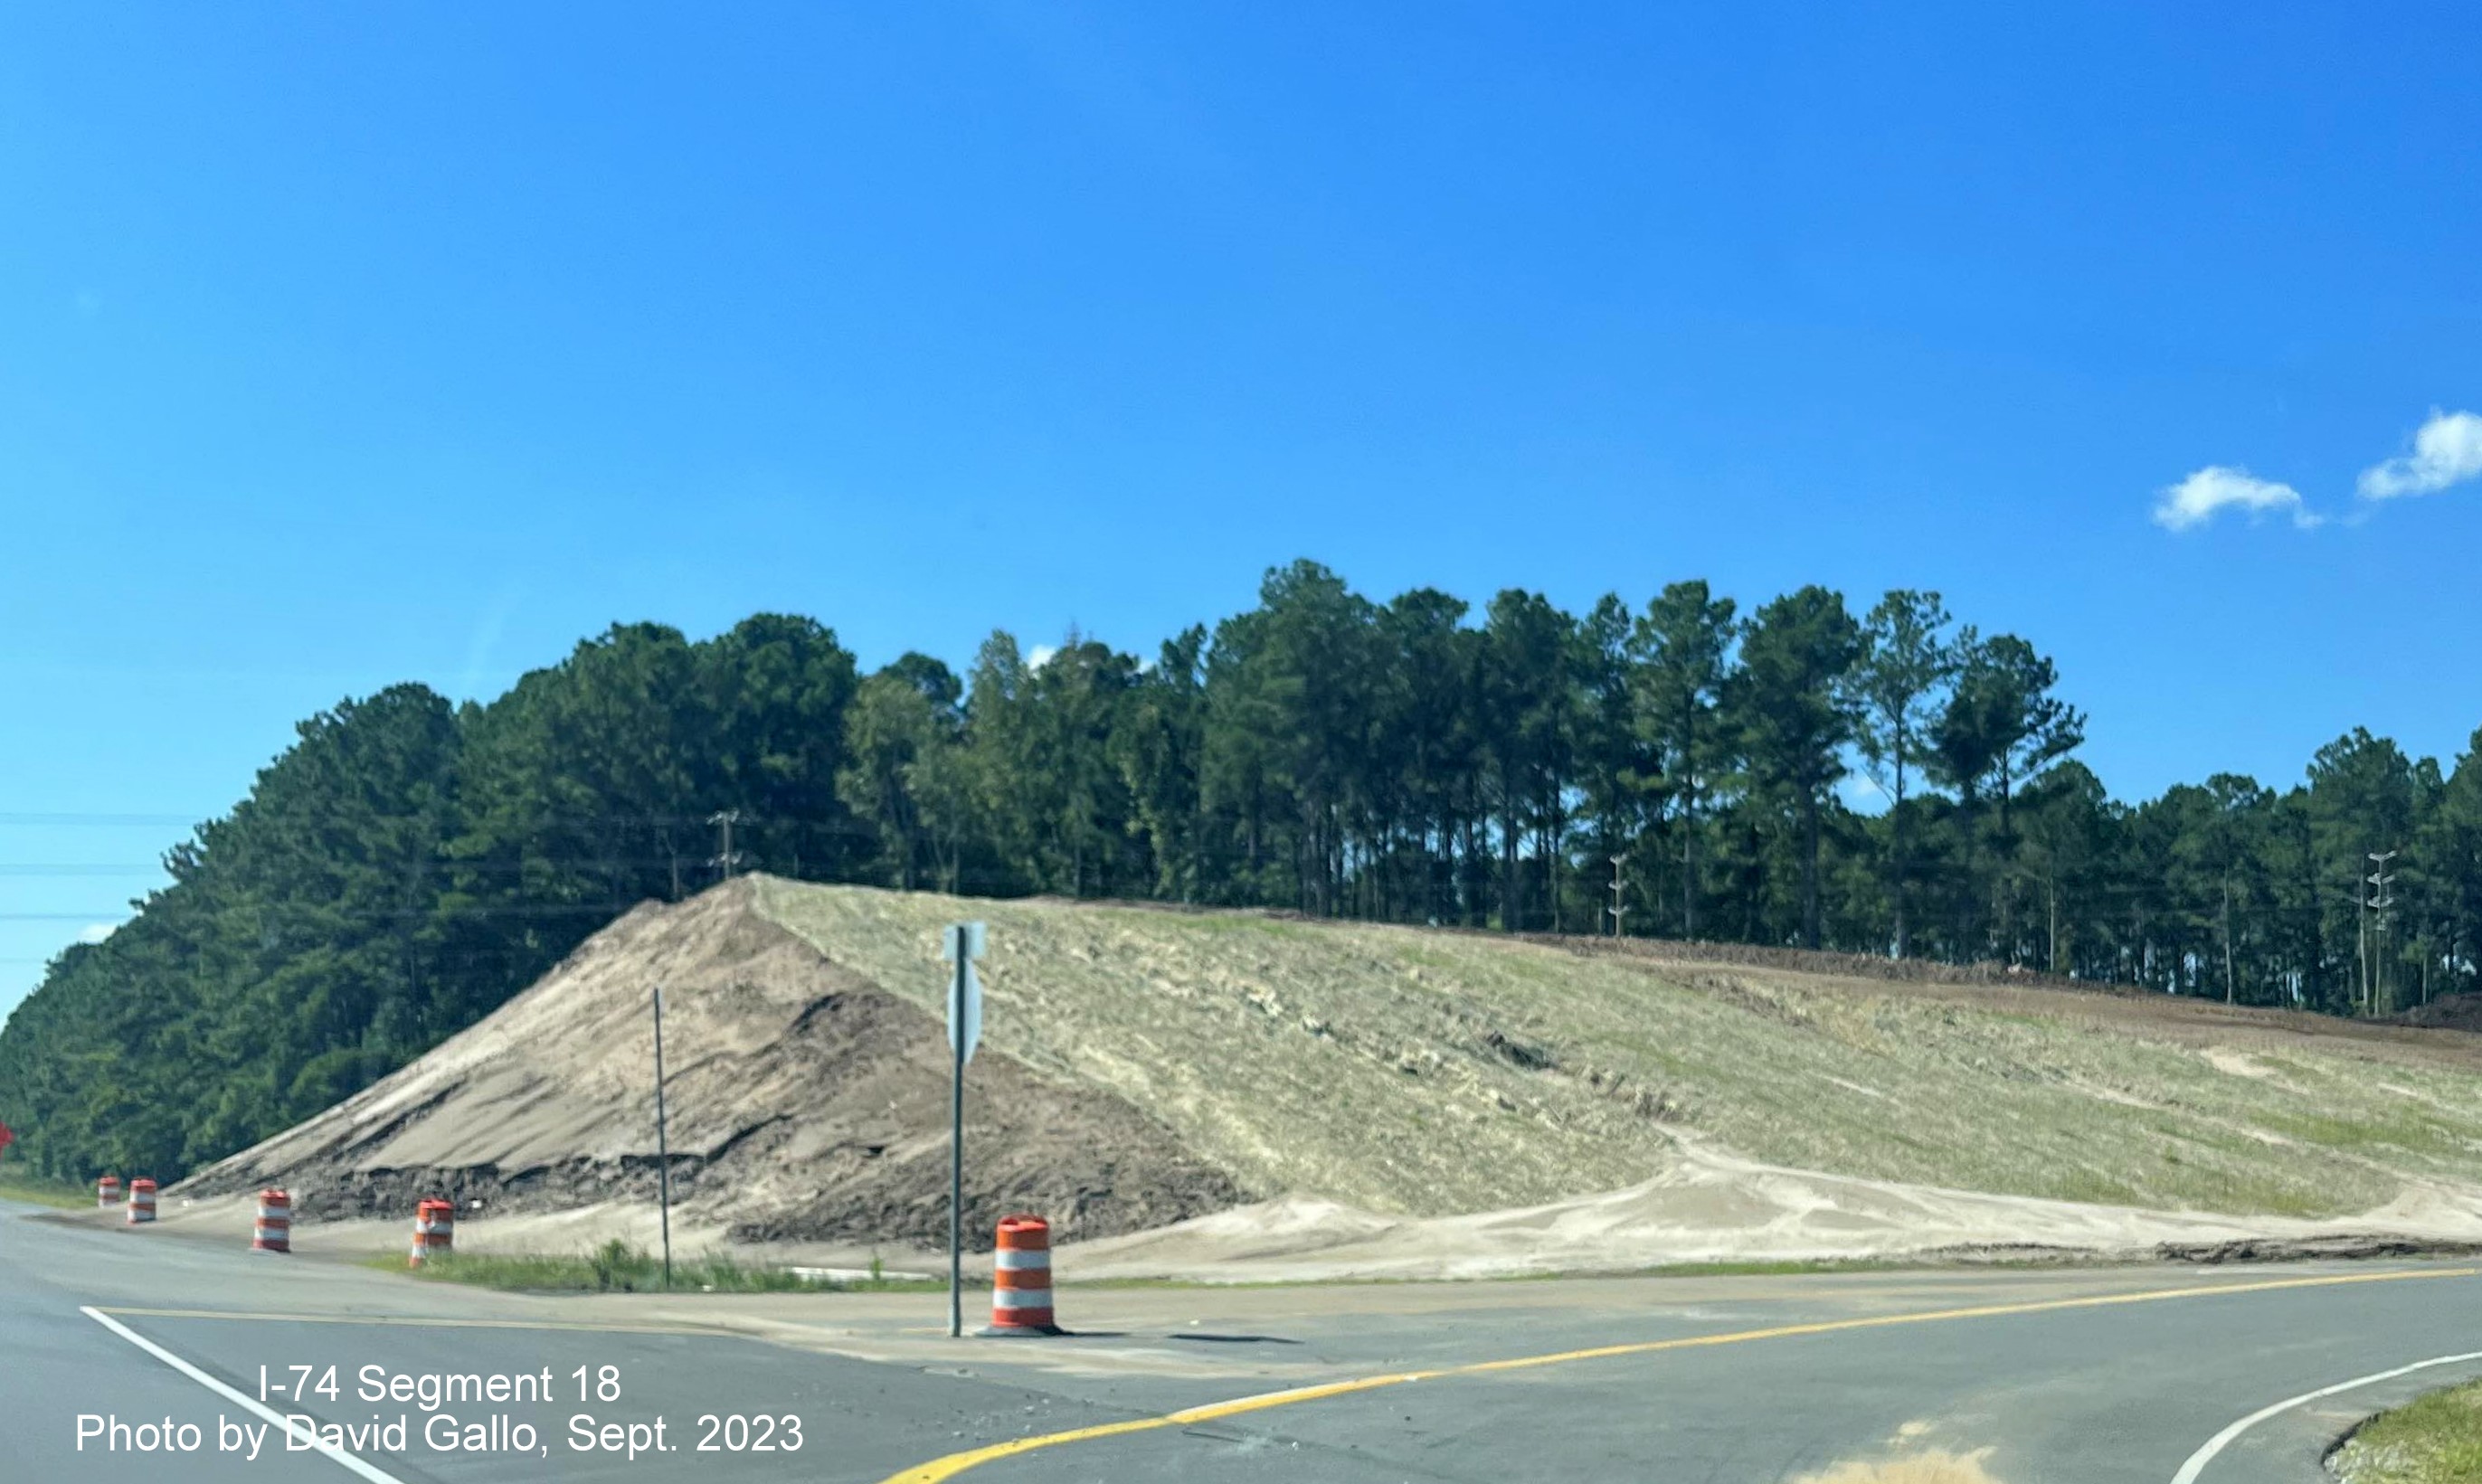 Image of the landscaping underway for future bridge to carry Chauncey Town Road over US 74/76 (Future I-74) West in Lake Waccamaw, David Gallo, September 2023